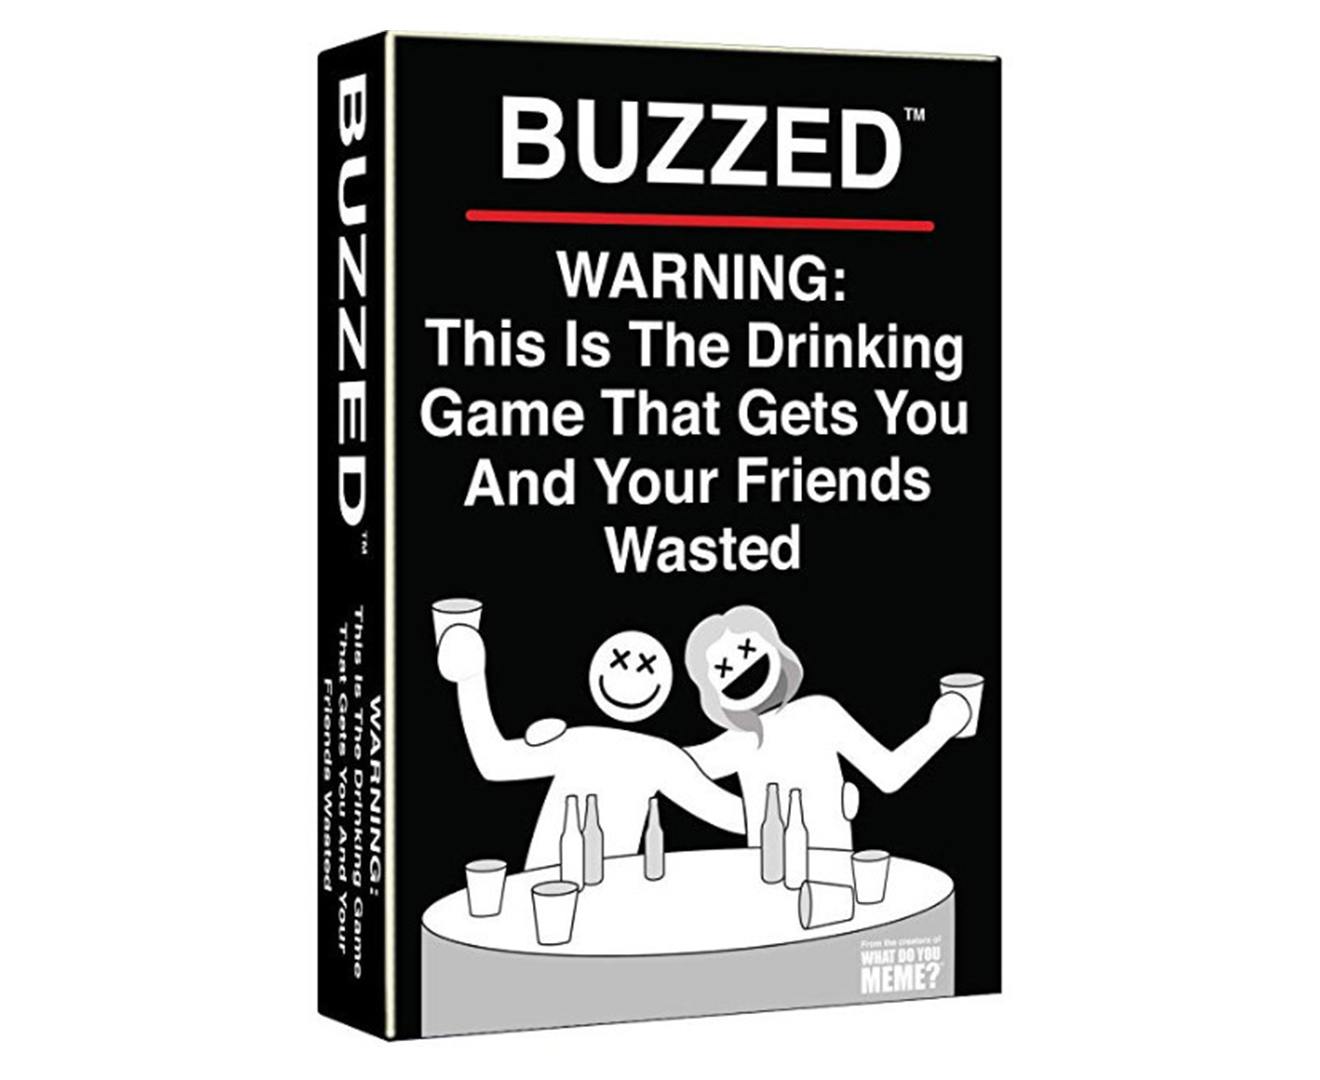 buzzed unsolved drinking game